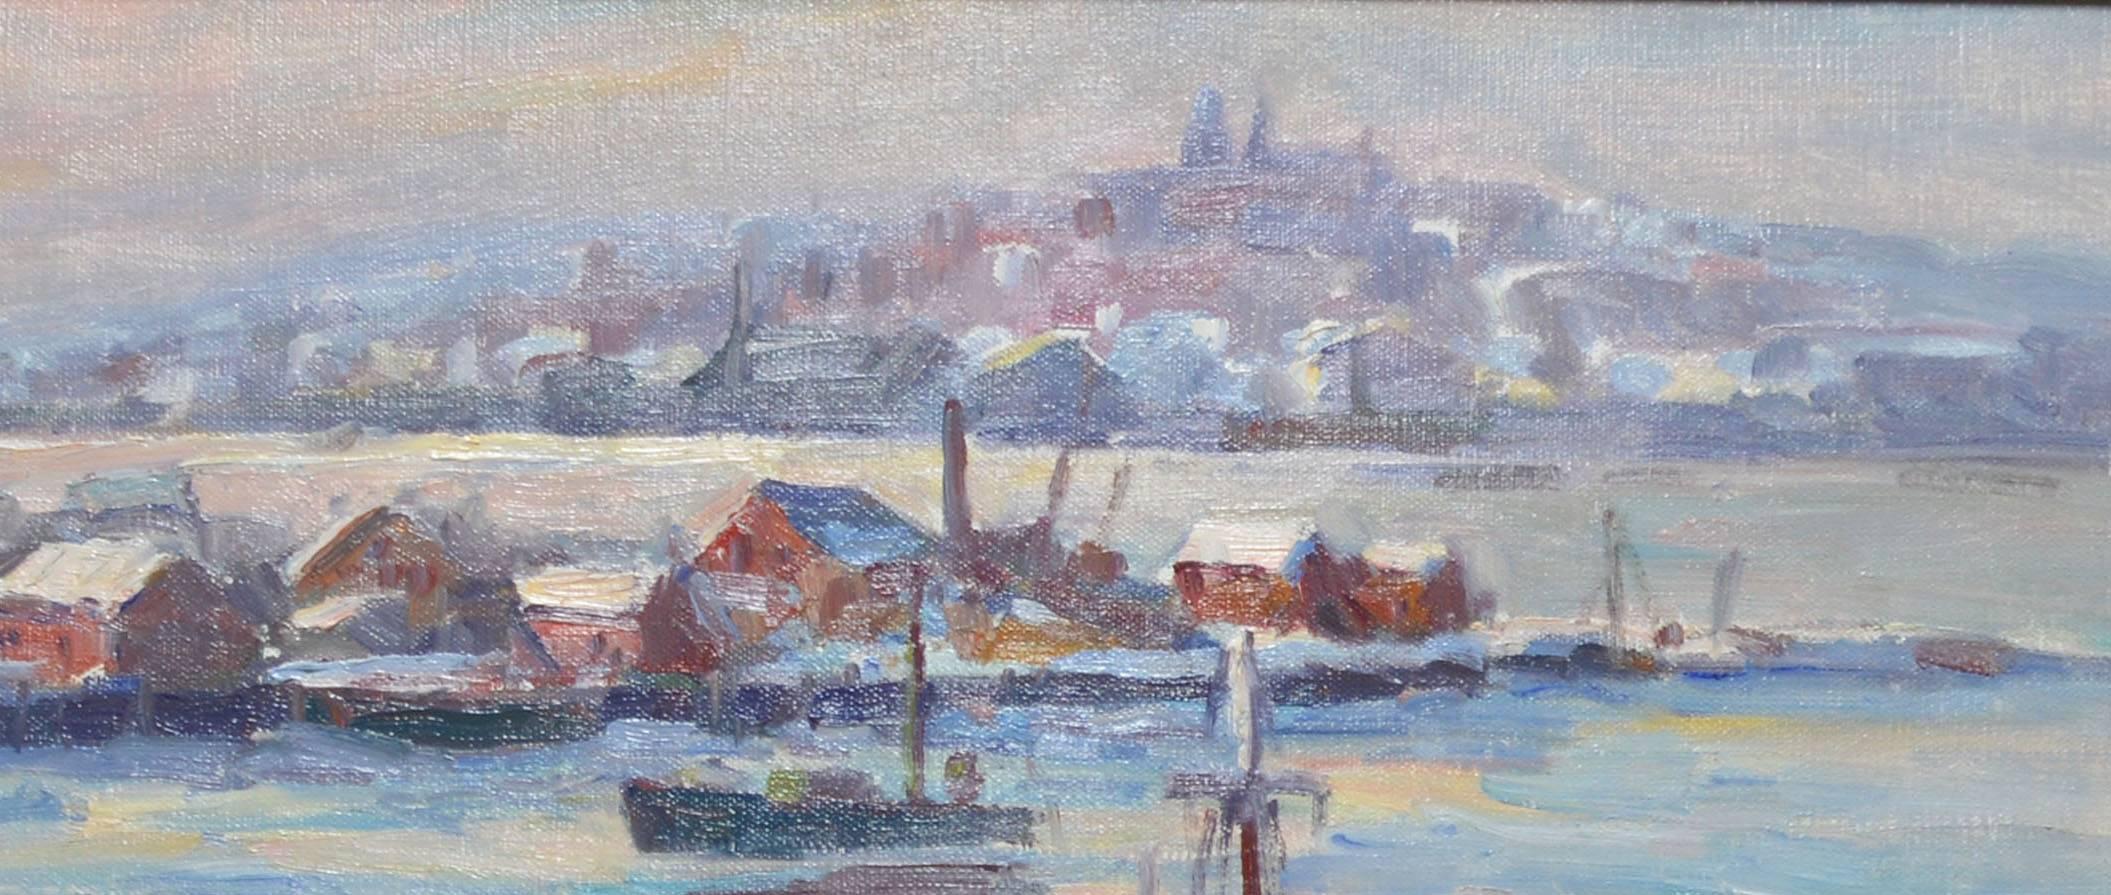 Impressionist harbor view of Smith Cove in winter by Emile Albert Gruppe  (1896 - 1978).  Oil on canvas, circa 1950.  Signed lower right, 